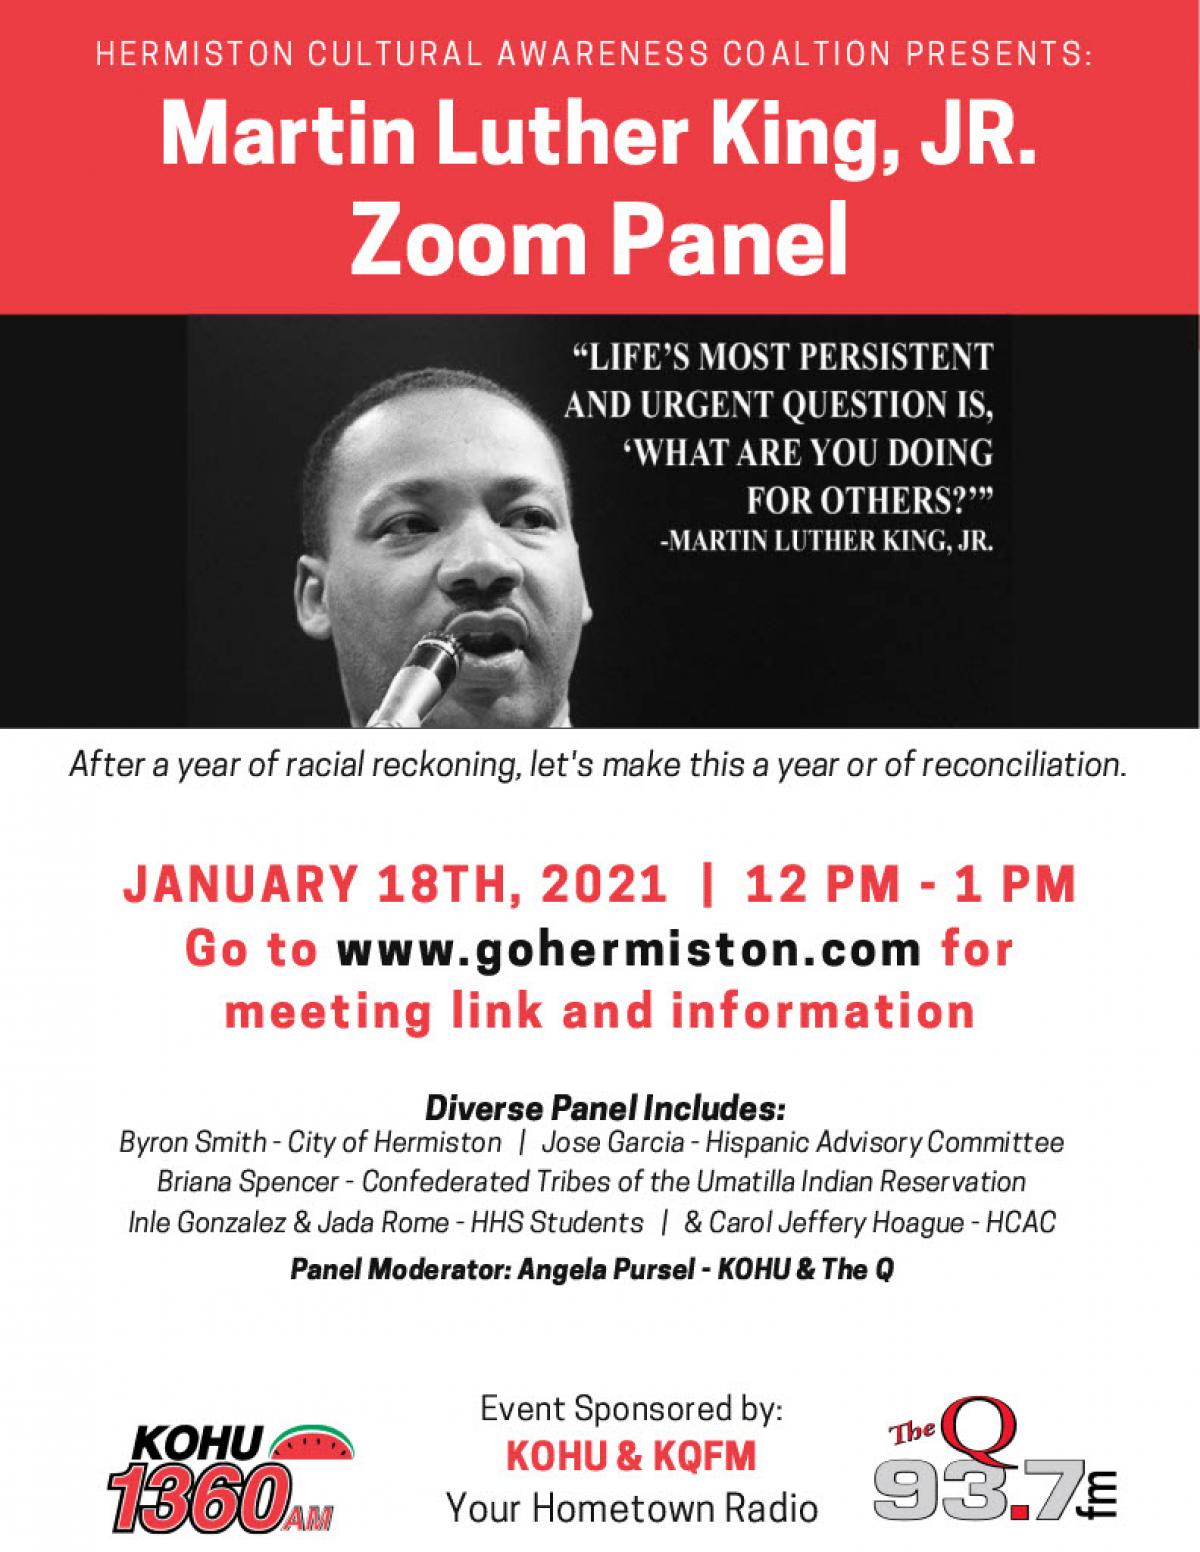 Martin Luther King Jr. Day Zoom Panel will be January 18 at noon